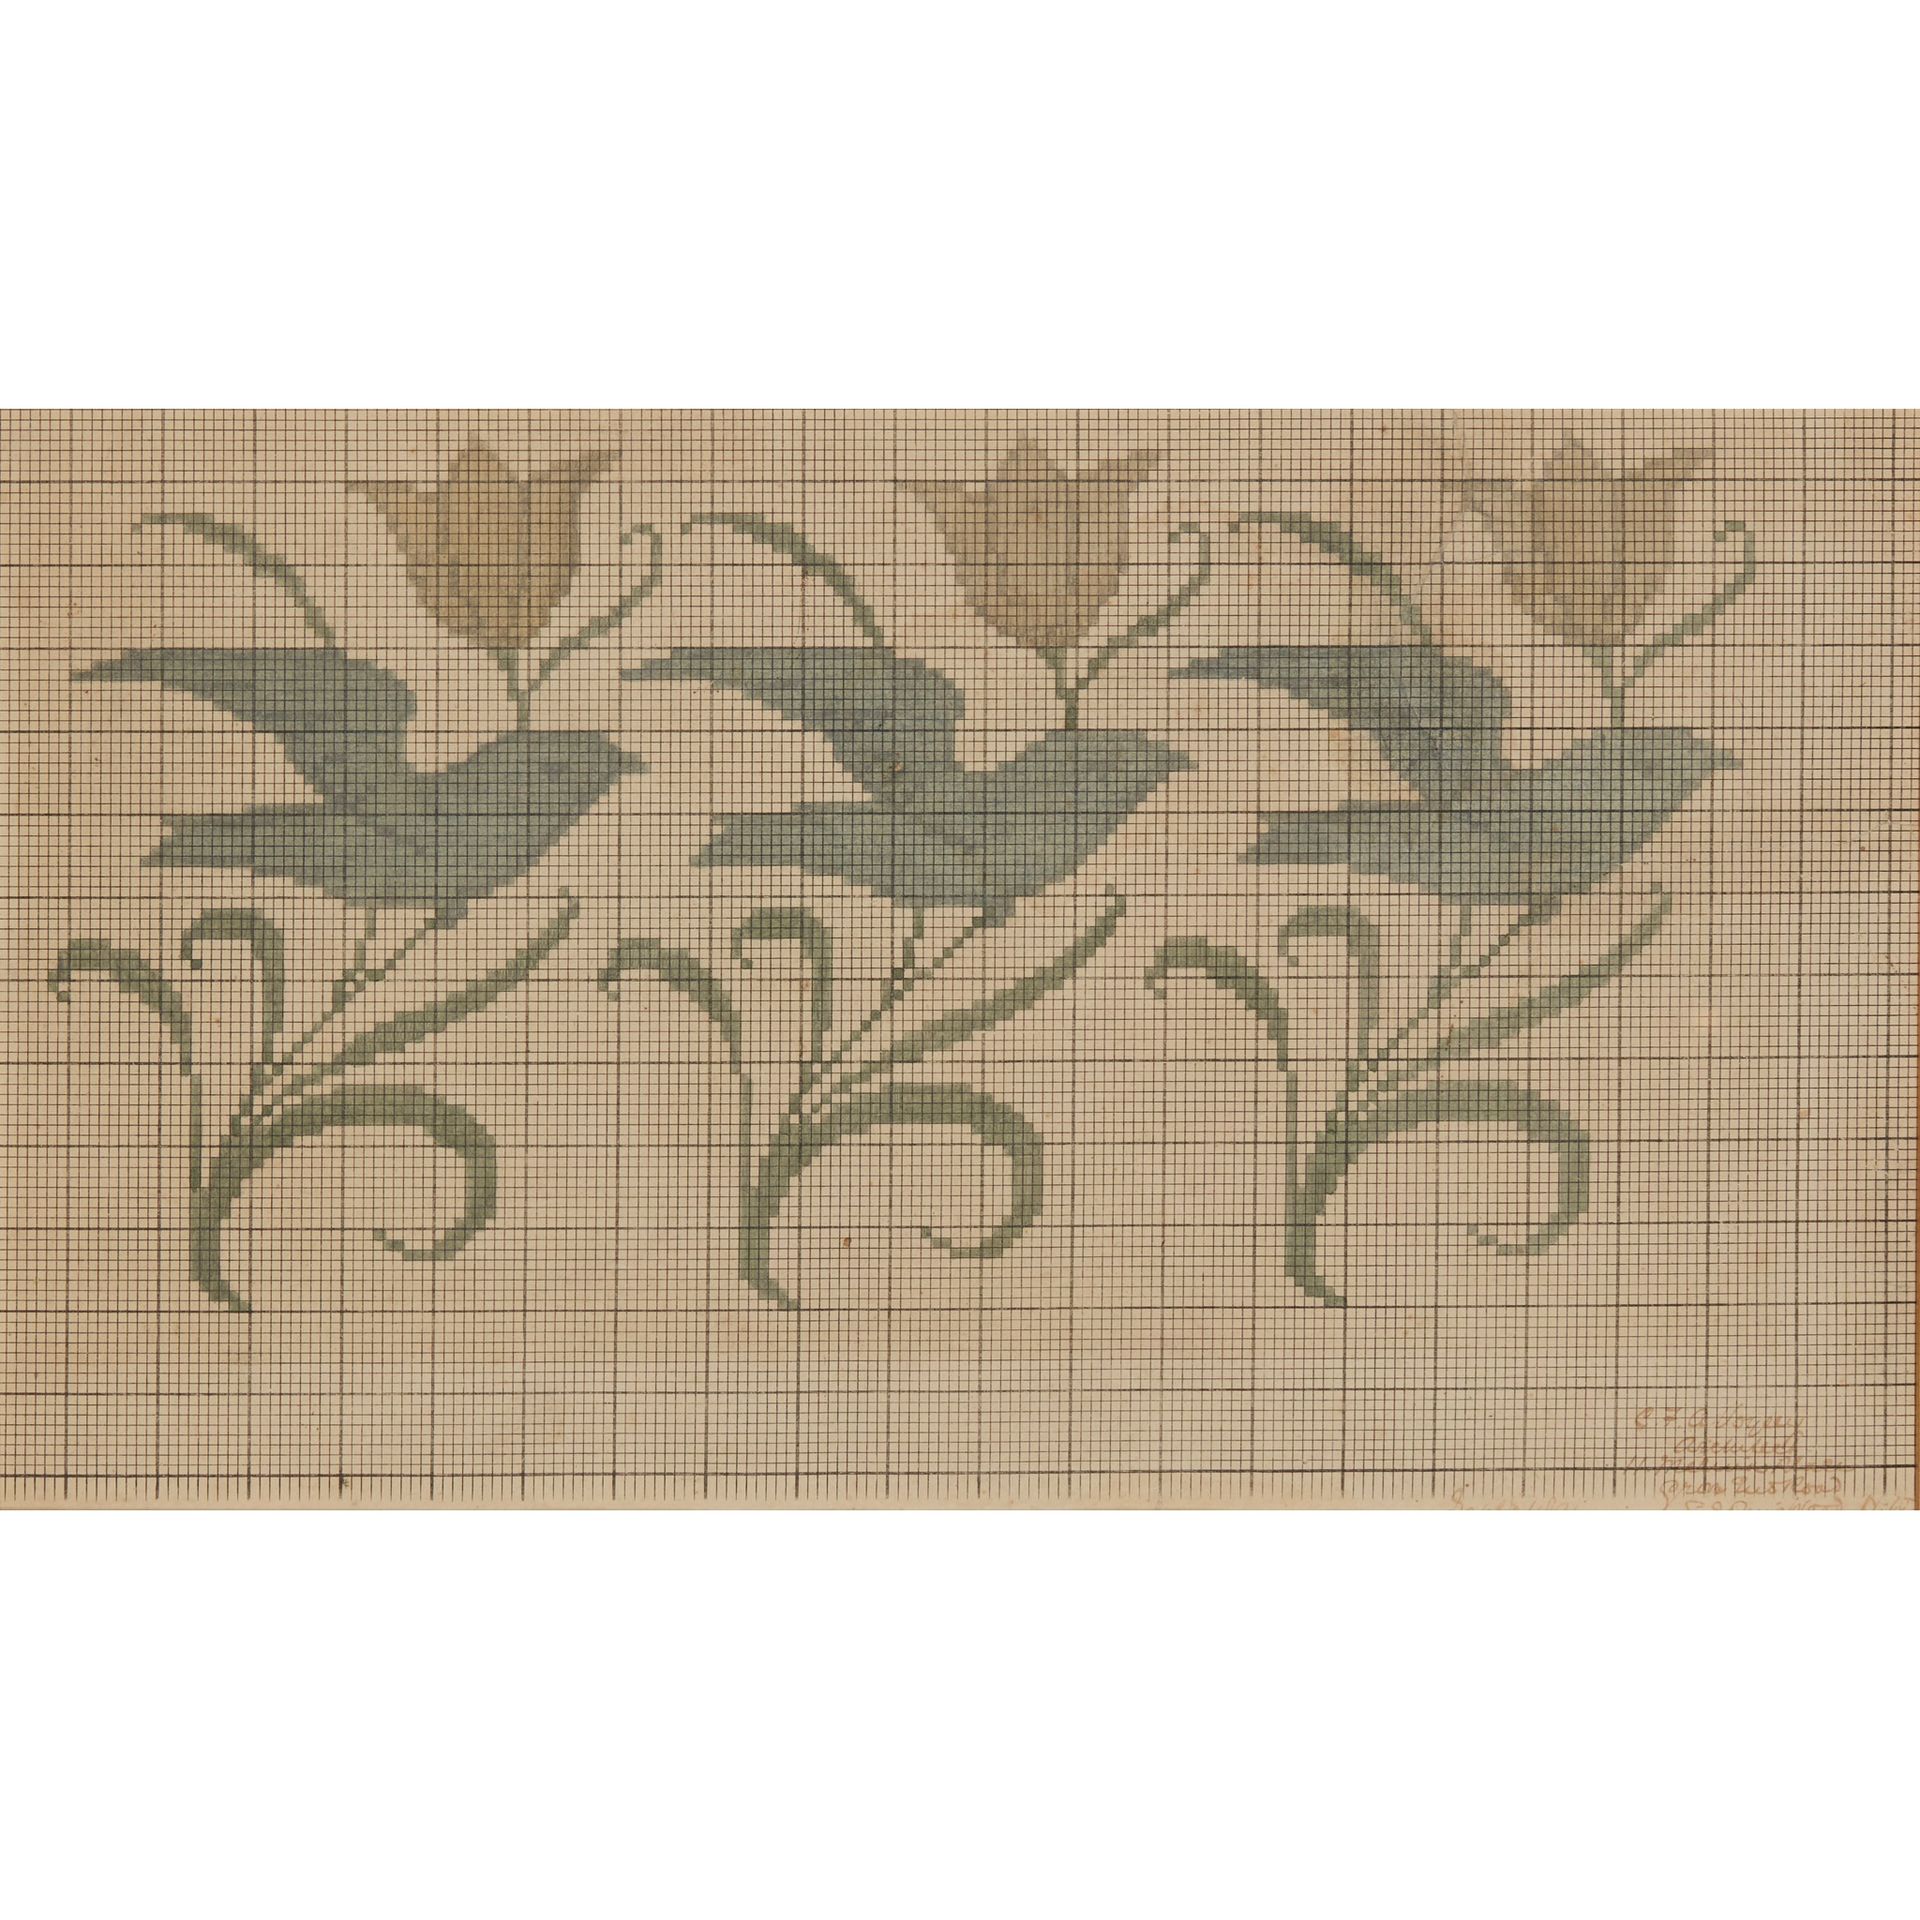 C.F.A. VOYSEY (1857-1941) ORIGINAL DESIGN FOR A NEEDLEWORK Watercolour on graph &hellip;